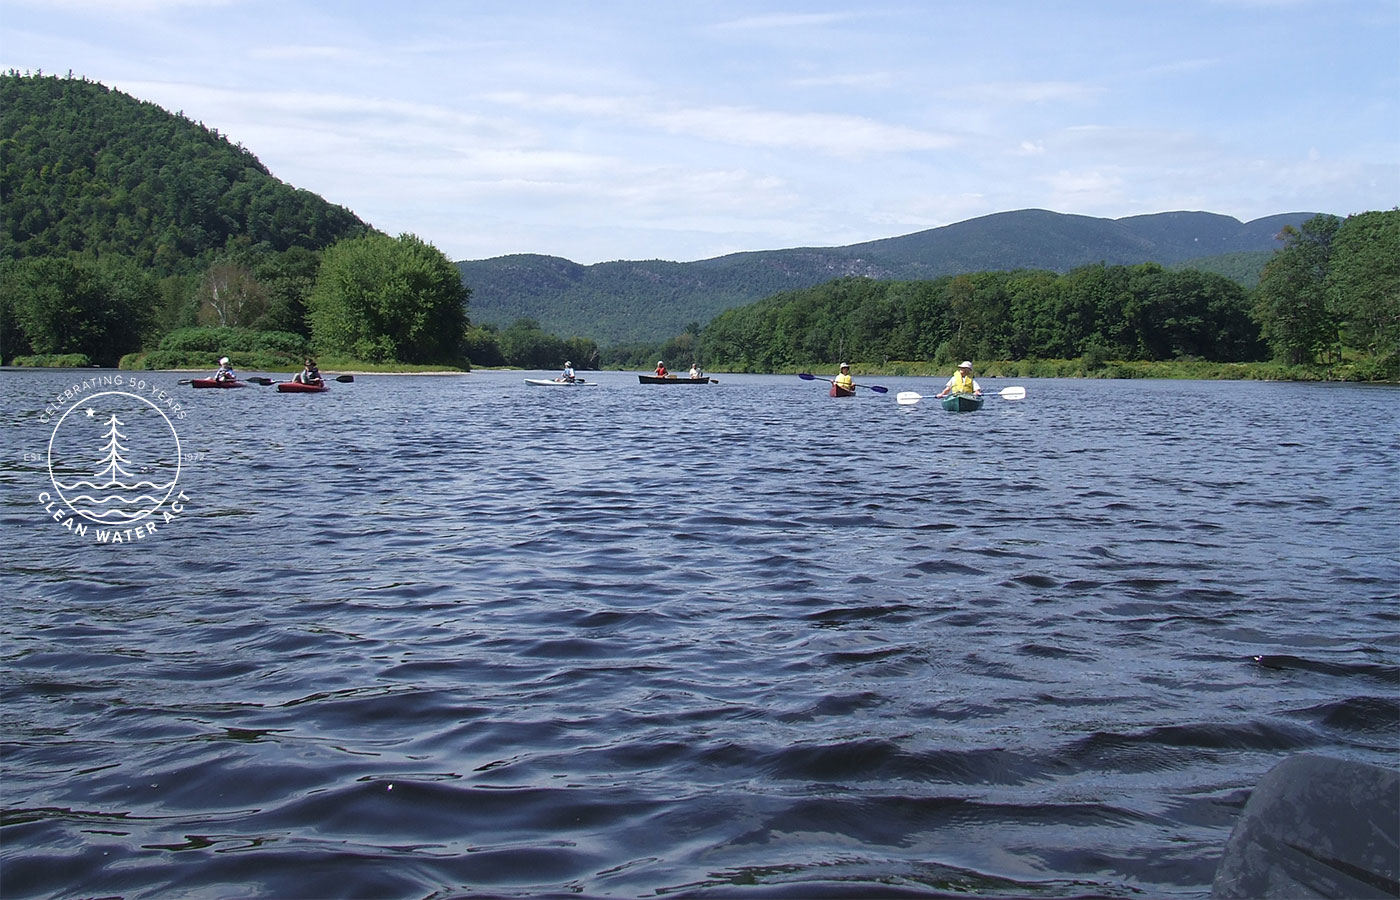 Paddling on the Androscoggin River